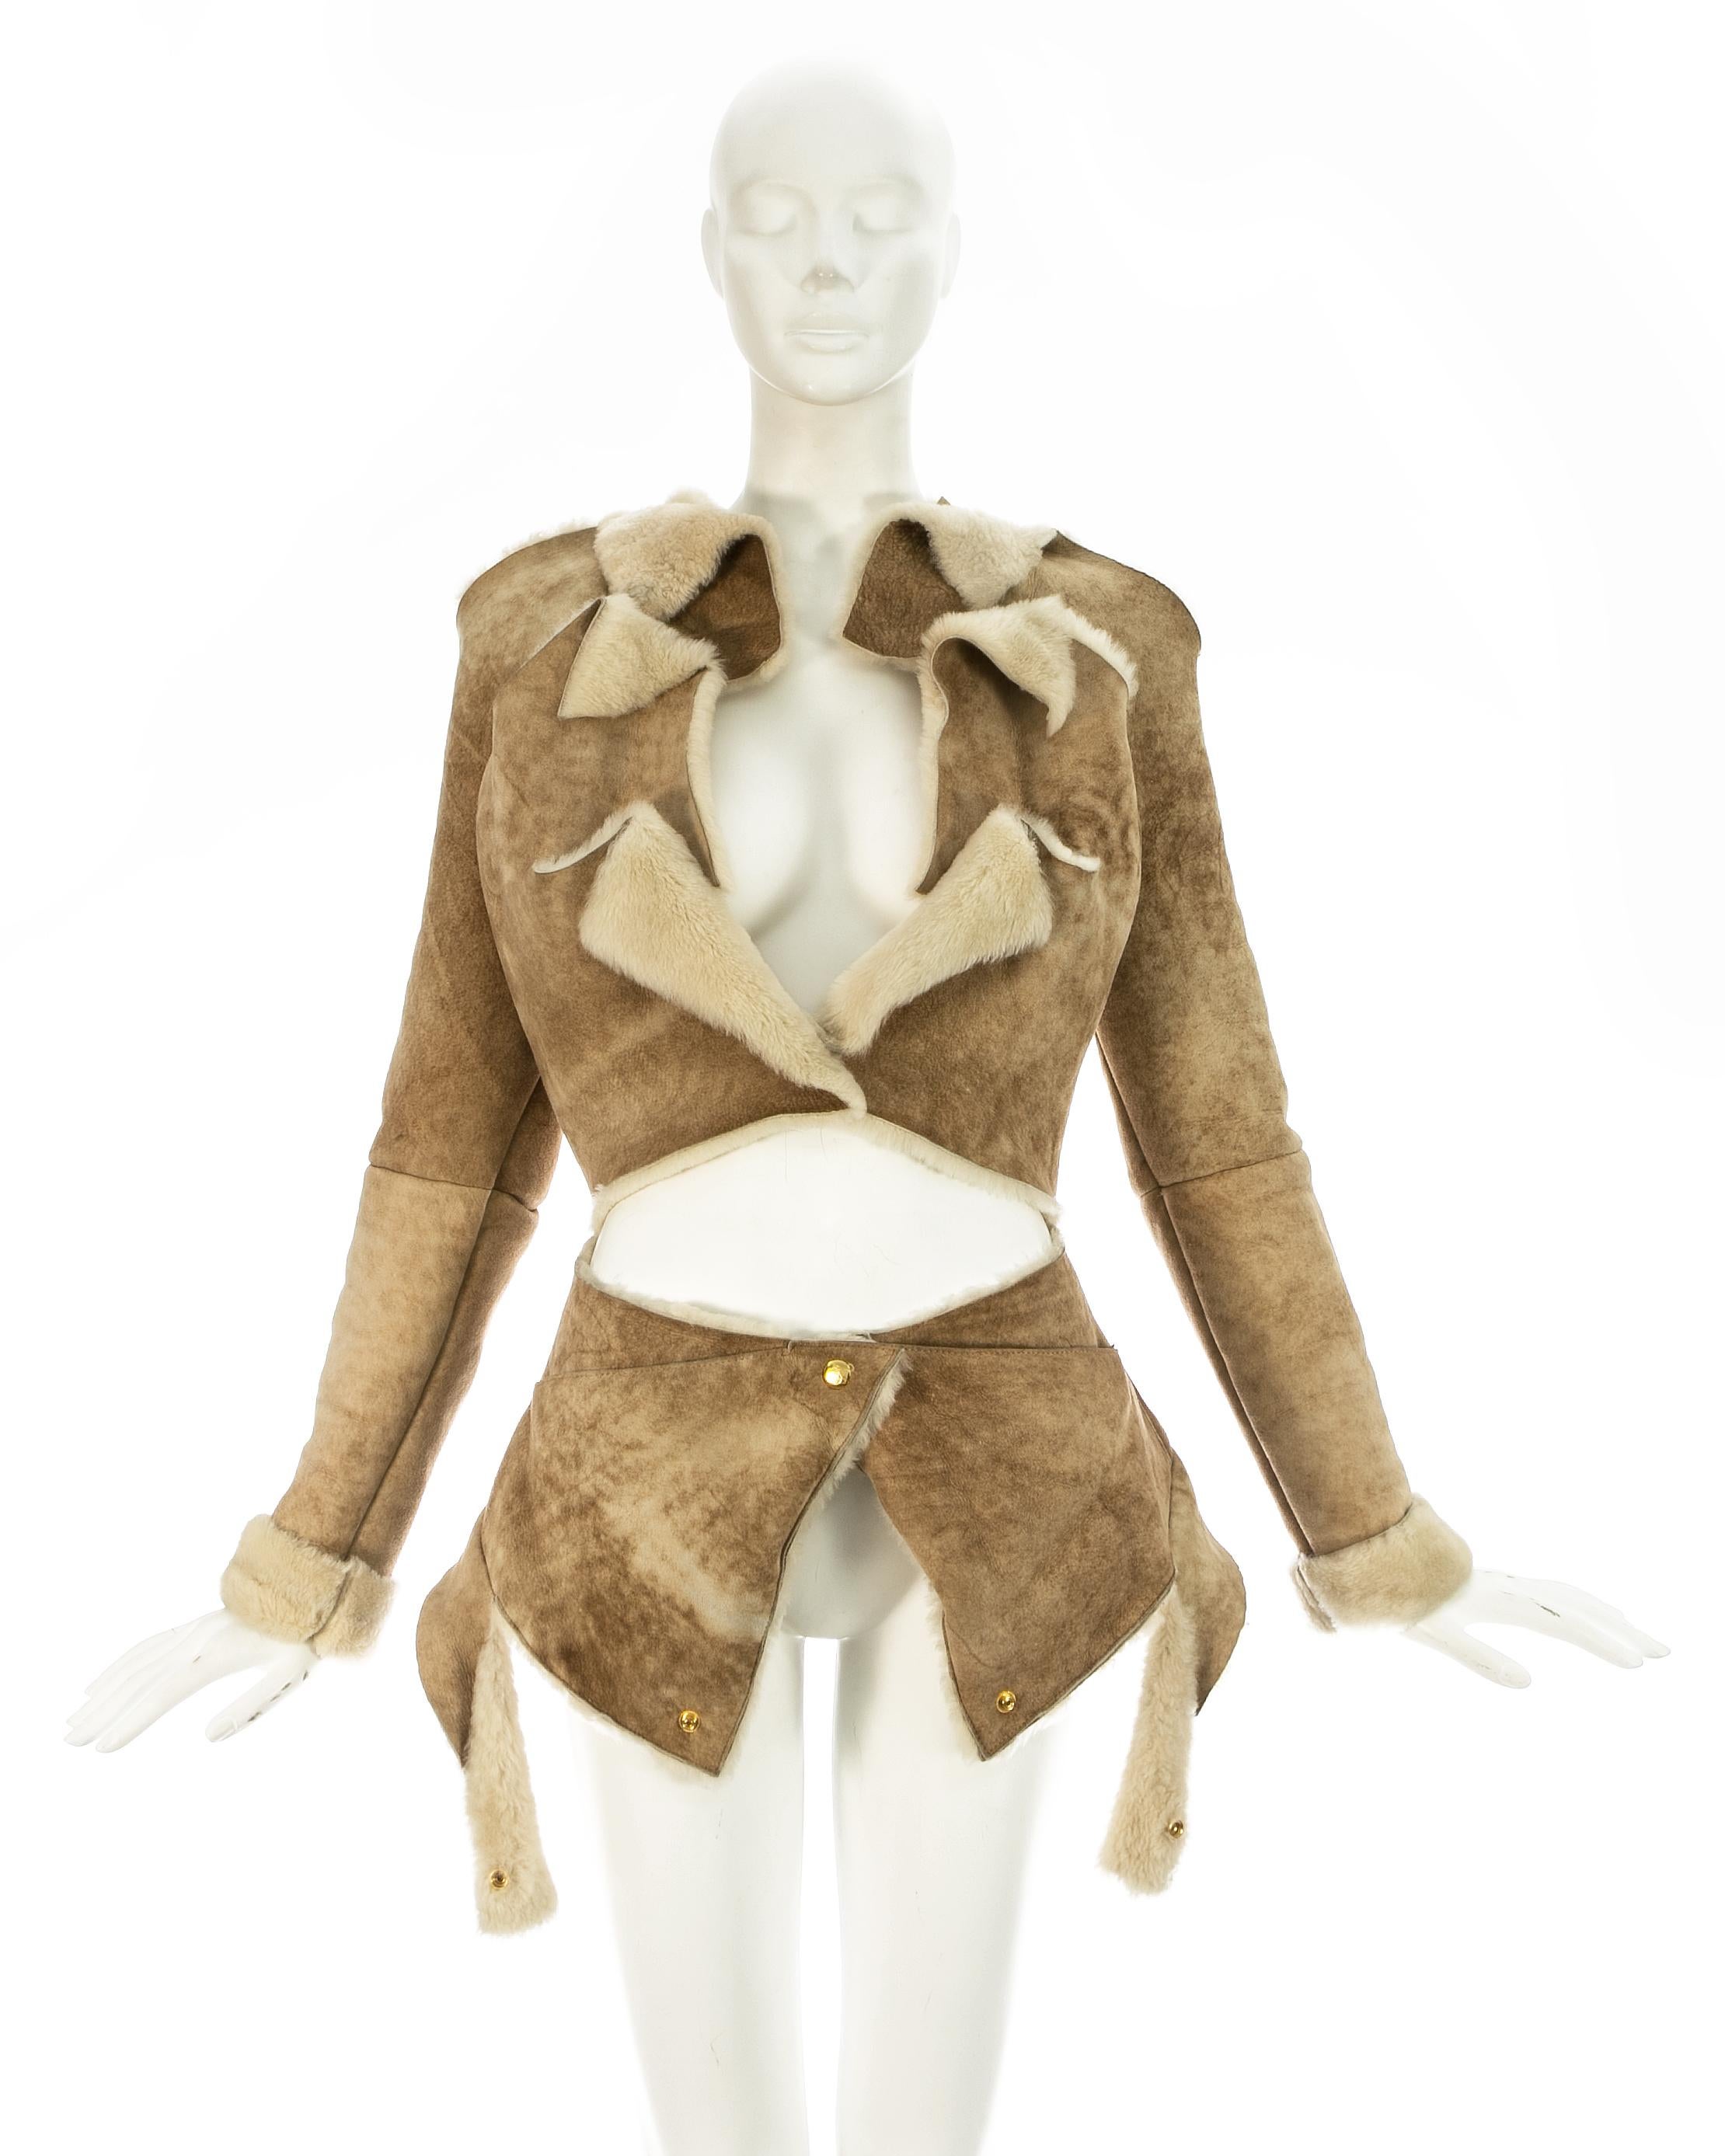 Vivienne Westwood; cream shearling sheepskin deconstructed jacket with raw edges and gold snap buttons closures throughout. Can be styled in multiple ways. 

Fall-Winter 1999